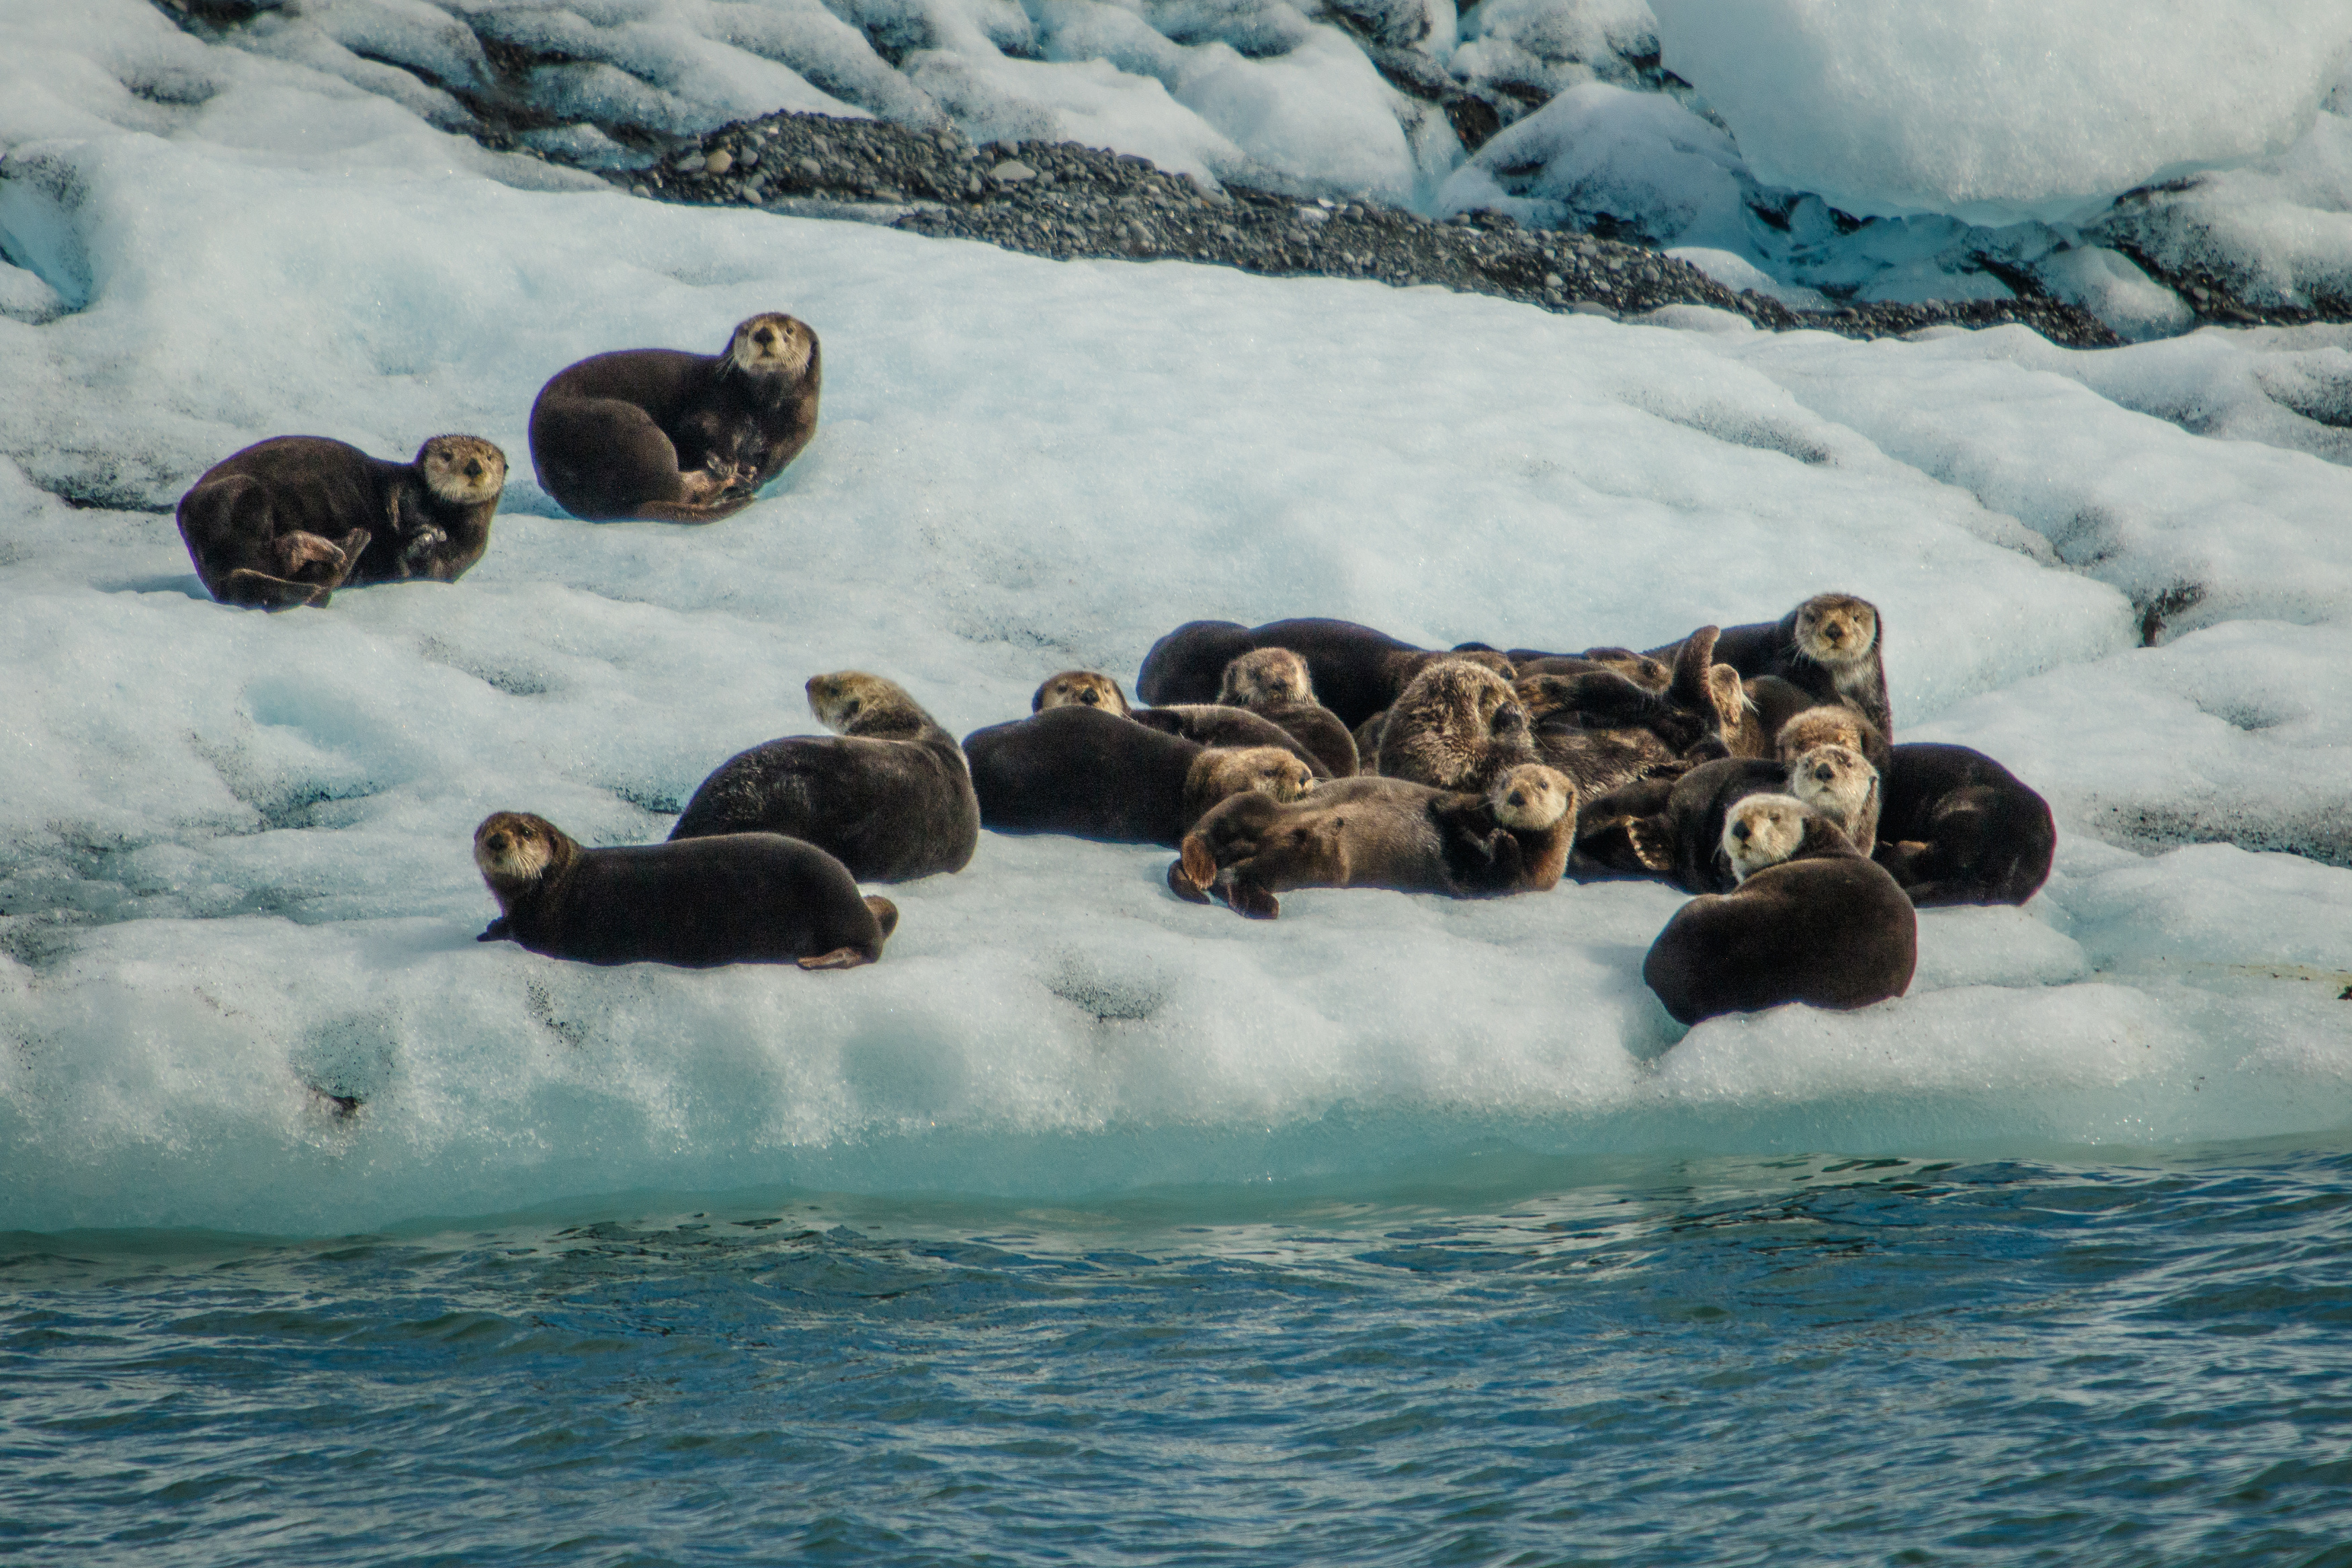 Discover the Best of Alaska in 8 Days - Sea Otters in Prince William Sound